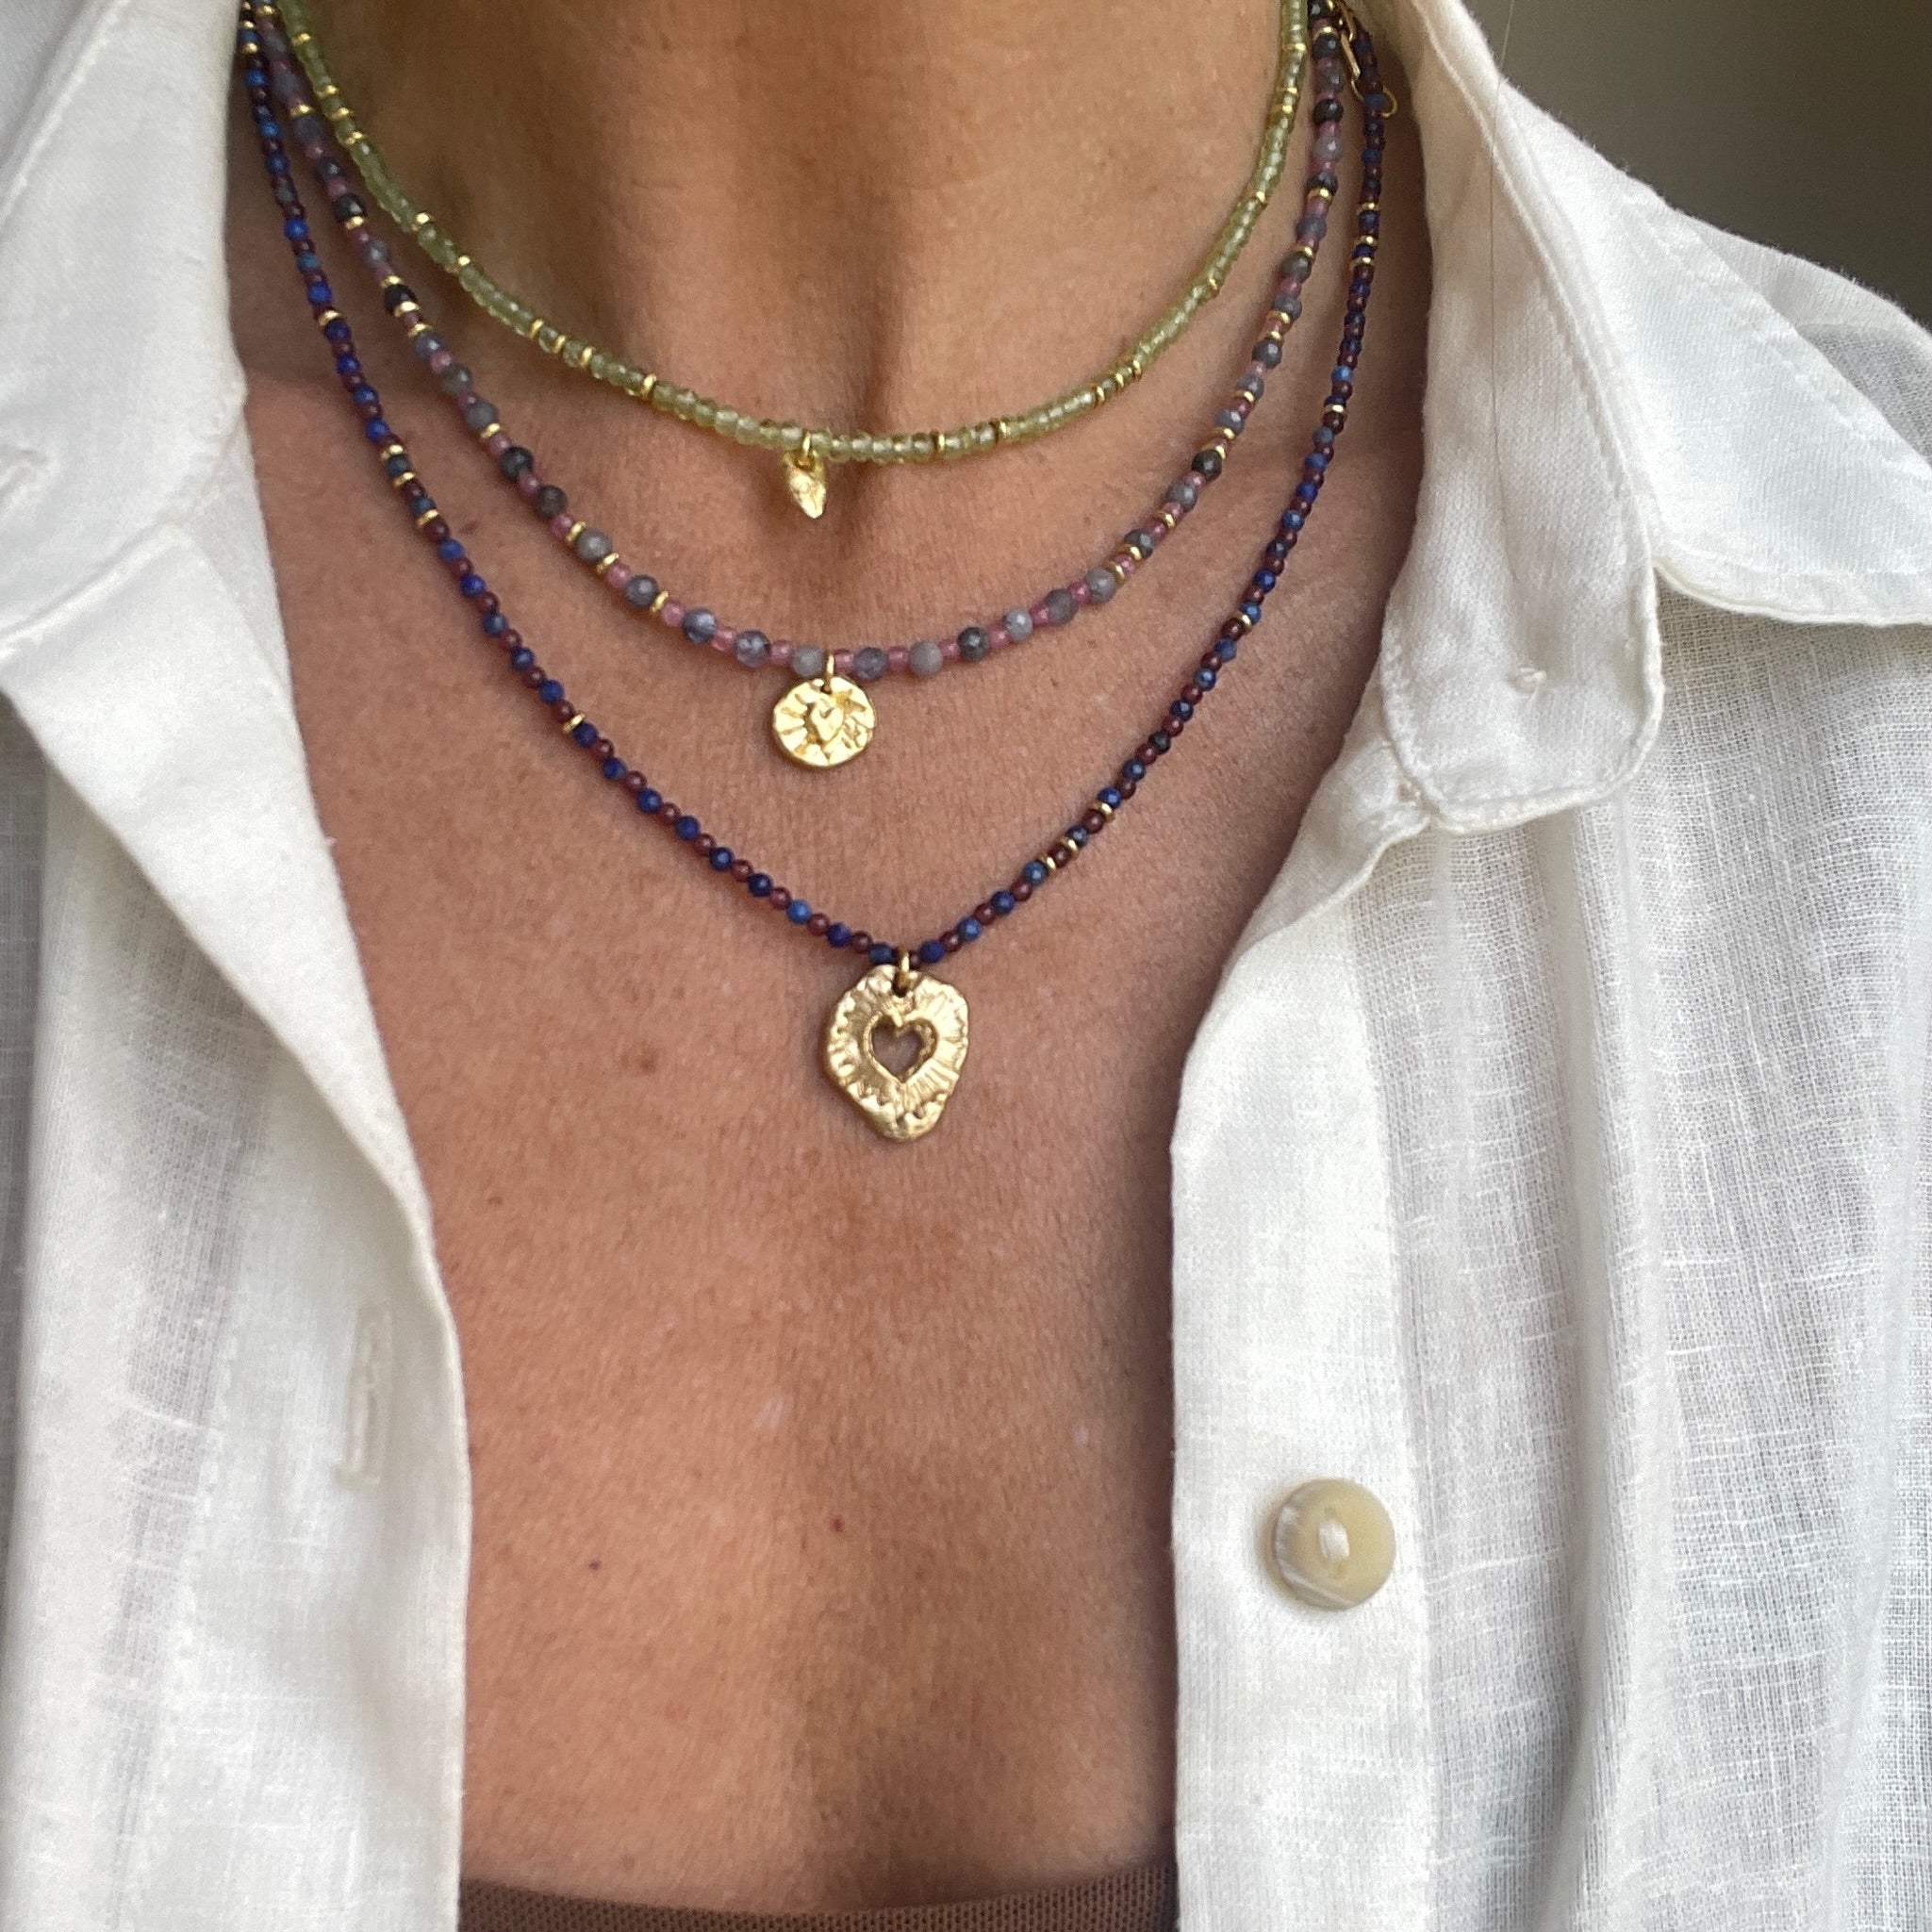 Harmony Beads Necklace - Grey Tanzanite with Gold &amp; Silver showtheLOVE Heart Charm